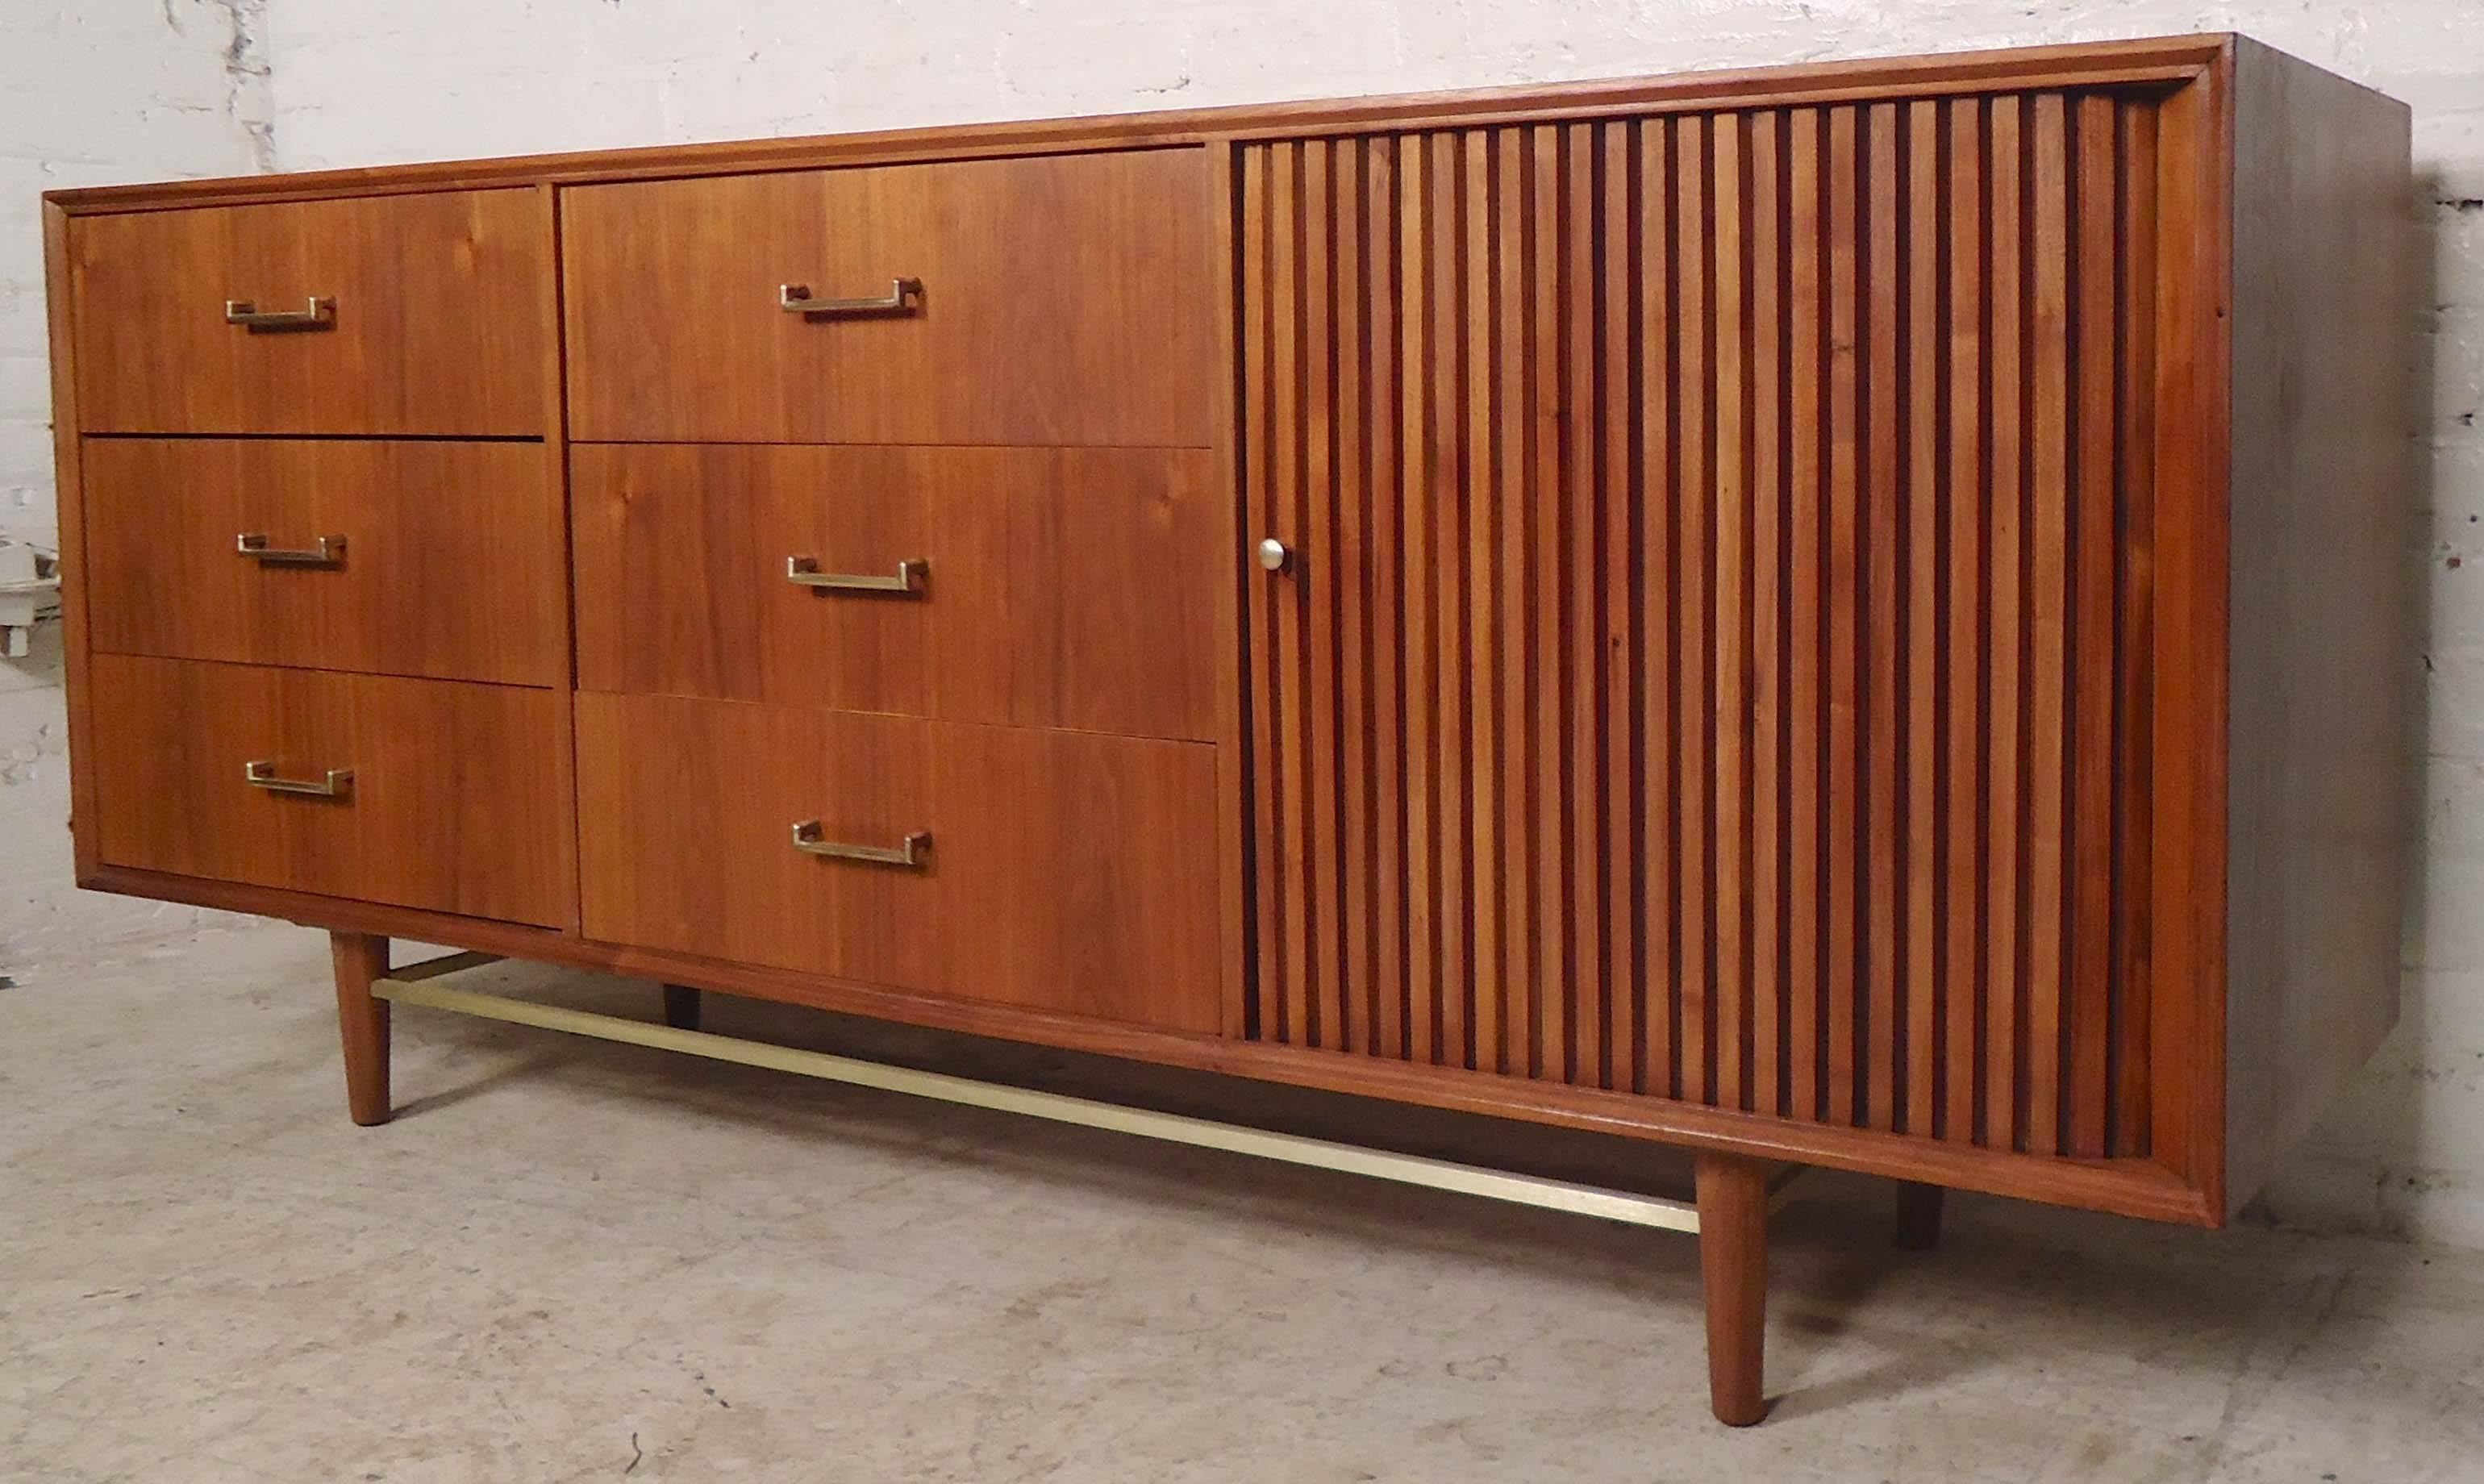 Long vintage dresser with nine total drawers in walnut grain. Sleek straight lines, brass hardware and unique tambour door. Gives a great modern look to the bedroom.

(Please confirm item location - NY or NJ - with dealer).
 